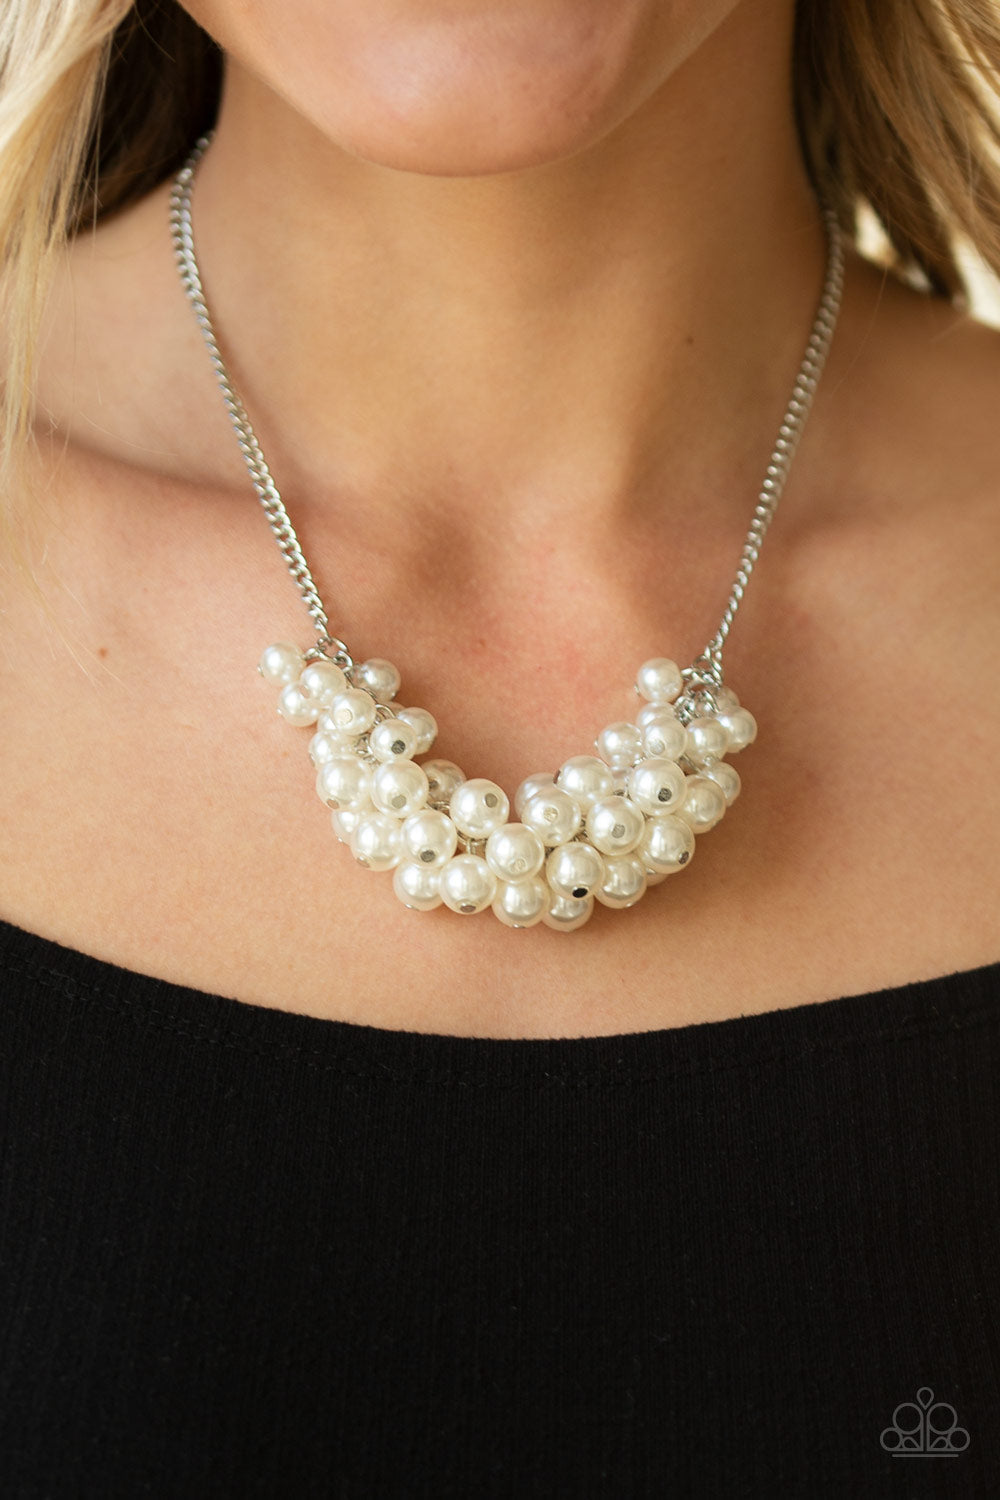 Grandiose Glimmer - White Pearl and Silver Necklace - Paparazzi Accessories - Bubbly white pearls dangle from the bottom of a glistening silver chain, creating a glamorously clustered display below the collar. Features an adjustable clasp closure.